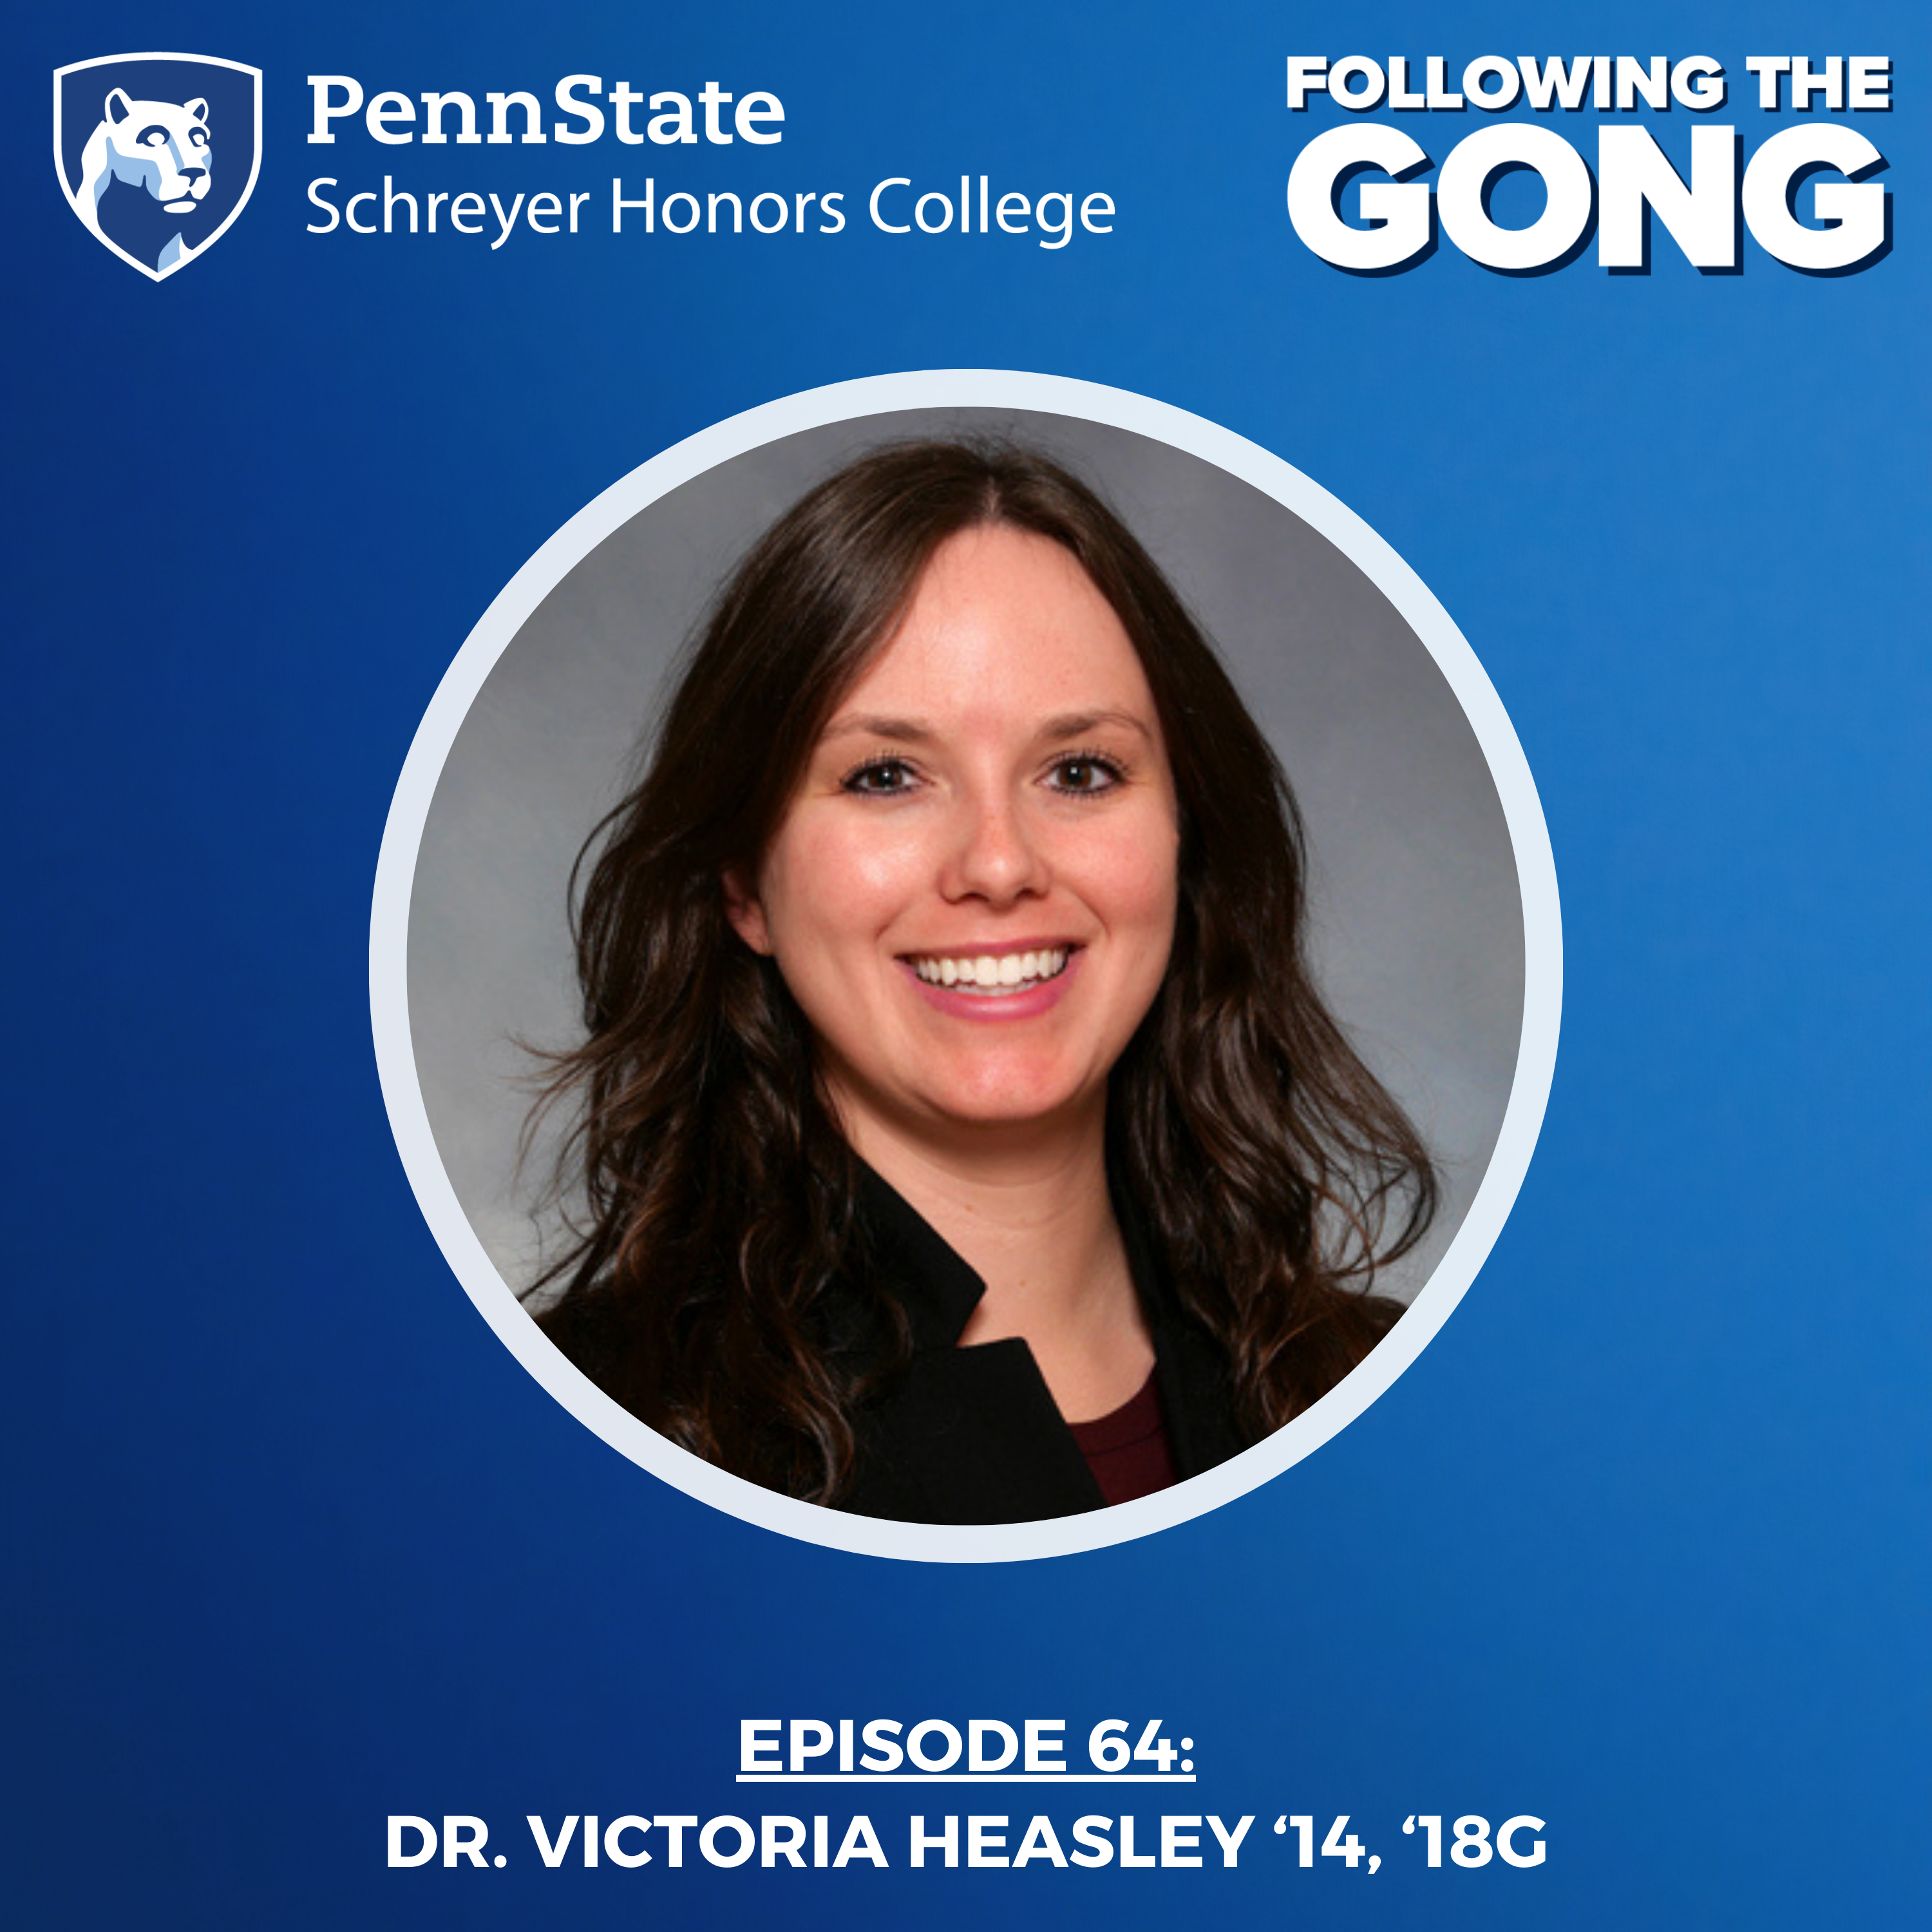 FTG 0064 – Adaptive Sports Medicine Care and Engineering with Physician Dr. Victoria Heasley ’14, ’18g